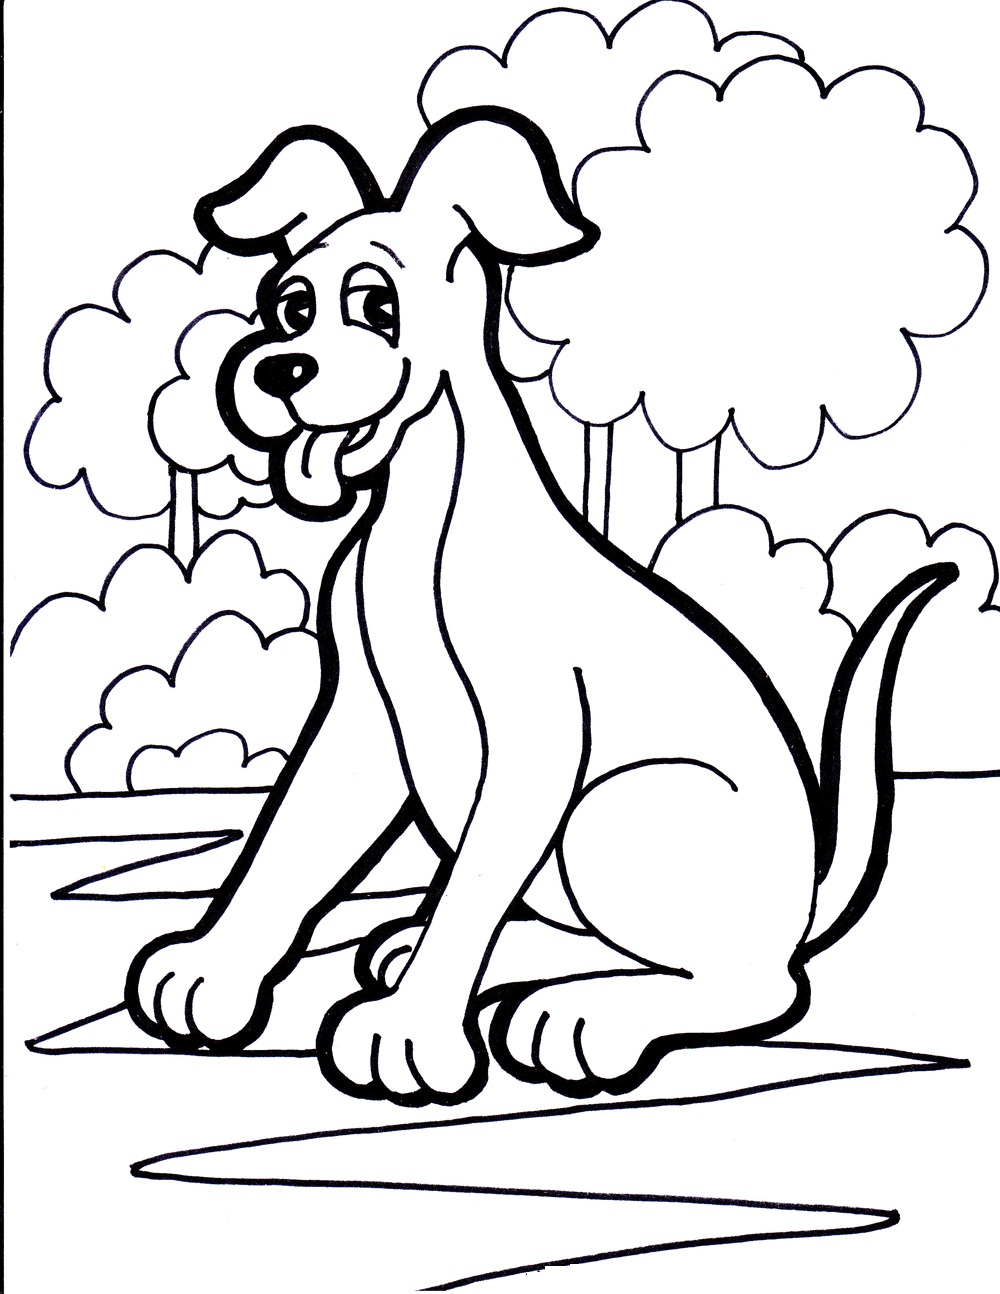 free-printable-dog-coloring-pages-templates-printable-download